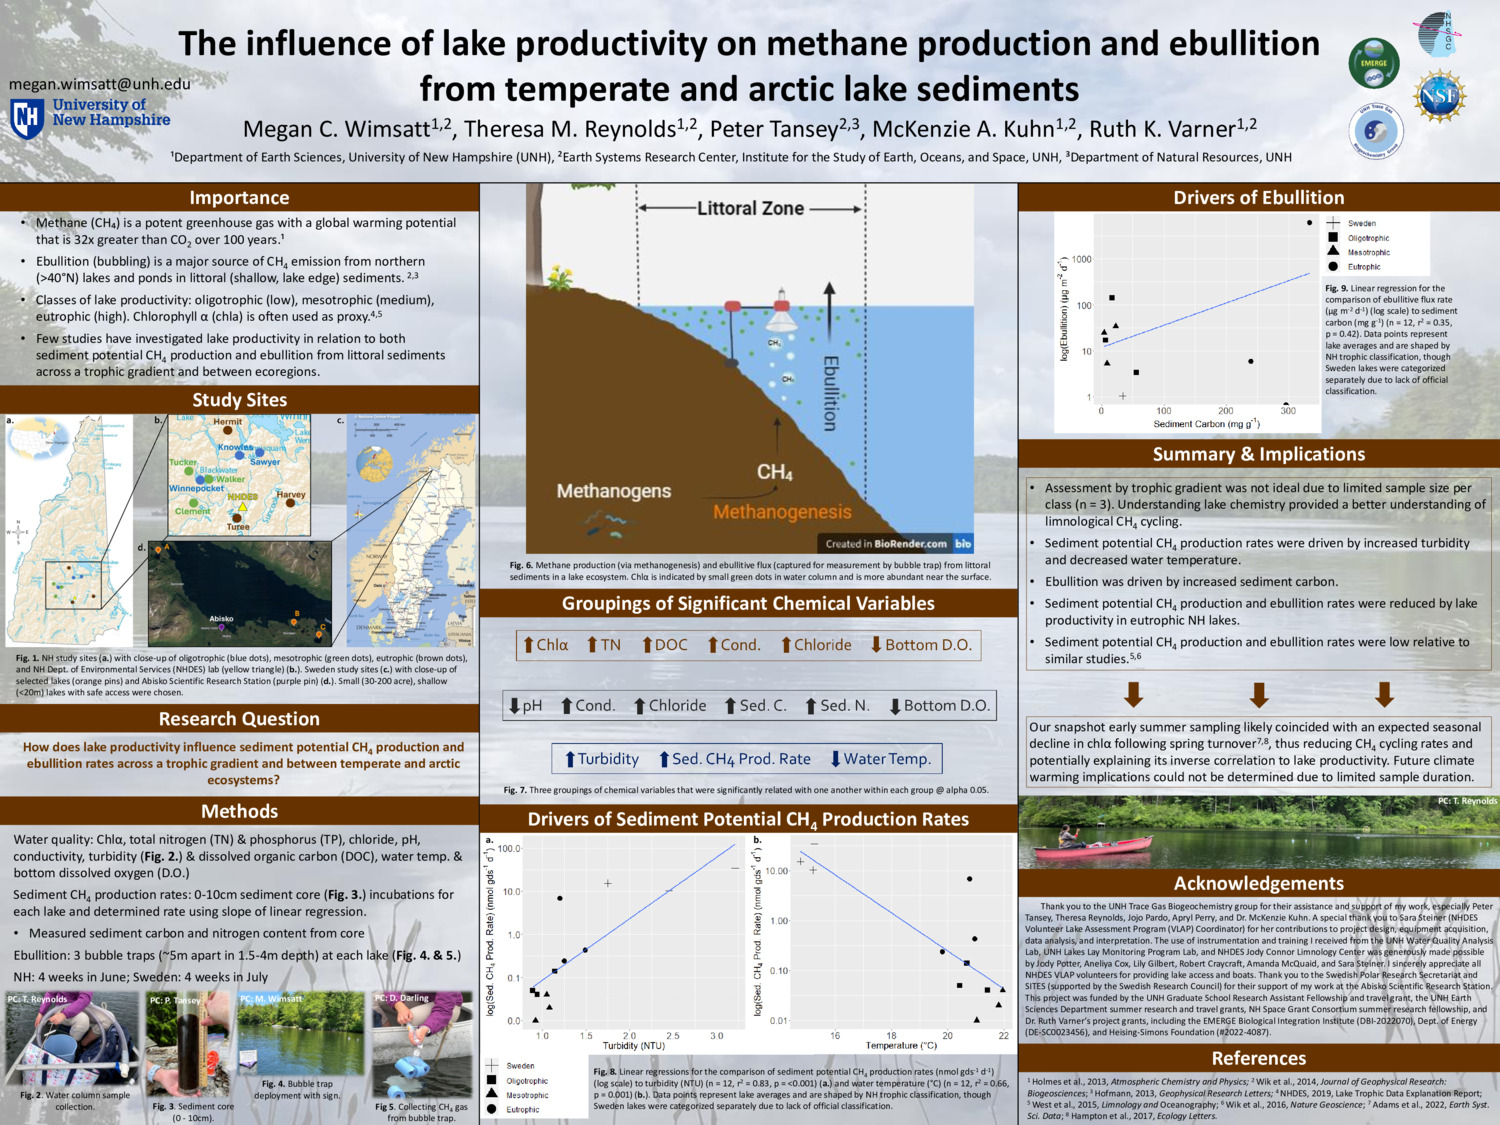 The Influence Of Lake Productivity On Methane Production And Ebullition From Temperate And Arctic Lake Sediments by mwimsatt